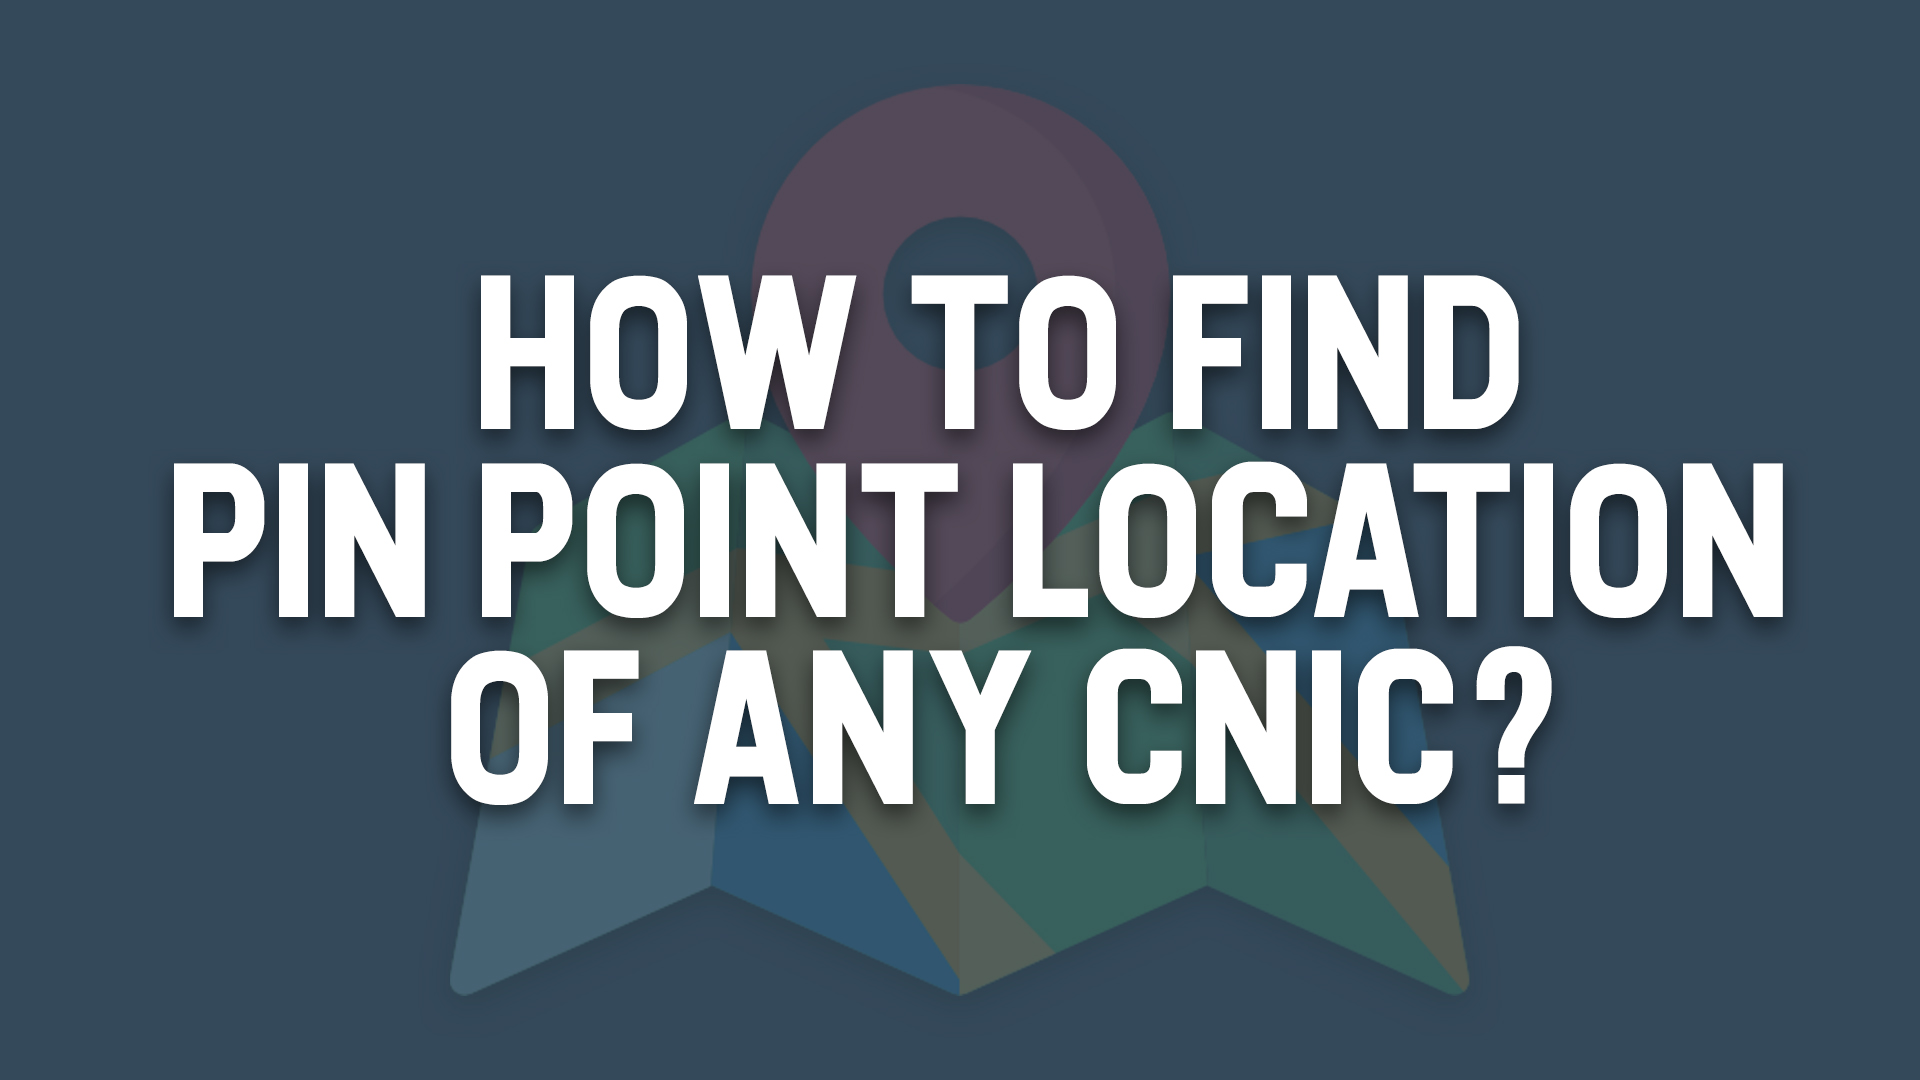 HOW TO FIND PIN POINT LOCATION OF ANY CNIC